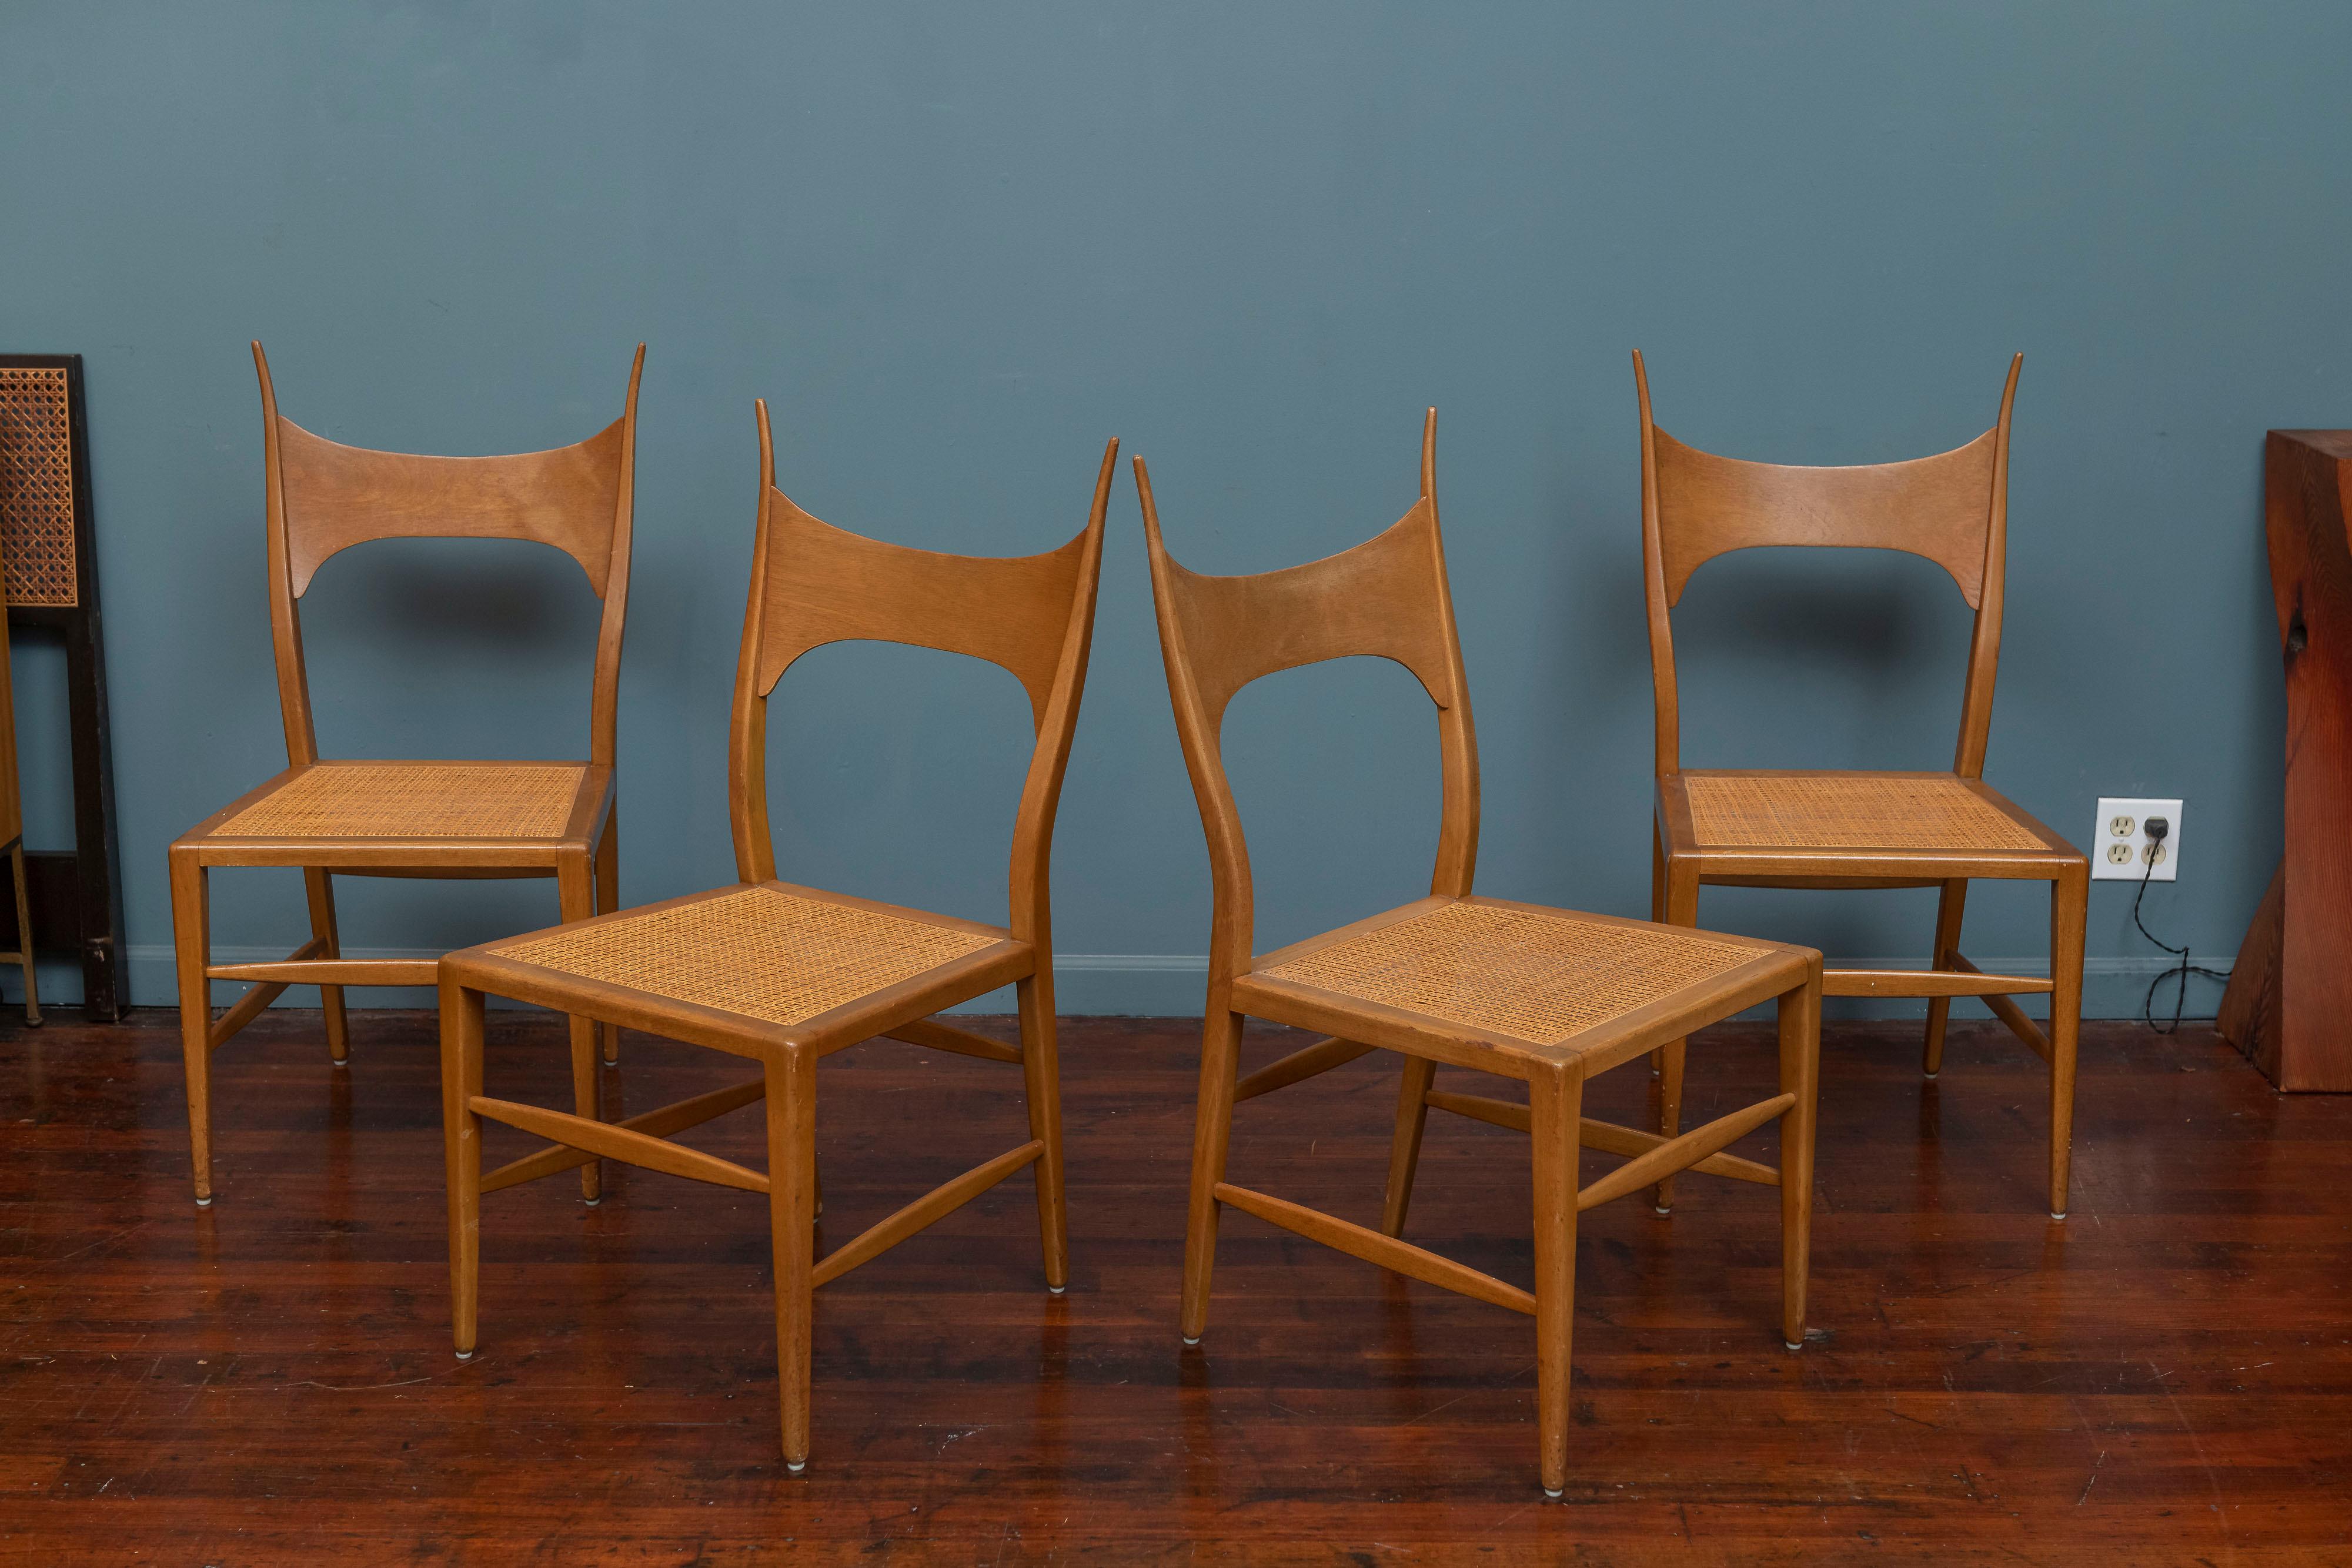 Edward Wormley design antler dining chairs for Dunbar, Model 5580. 
Rare and attractive design chair by Wormley in the height of his design career. Frames are bleached mahogany with cane seats. The chairs are elegant and beautiful but a little